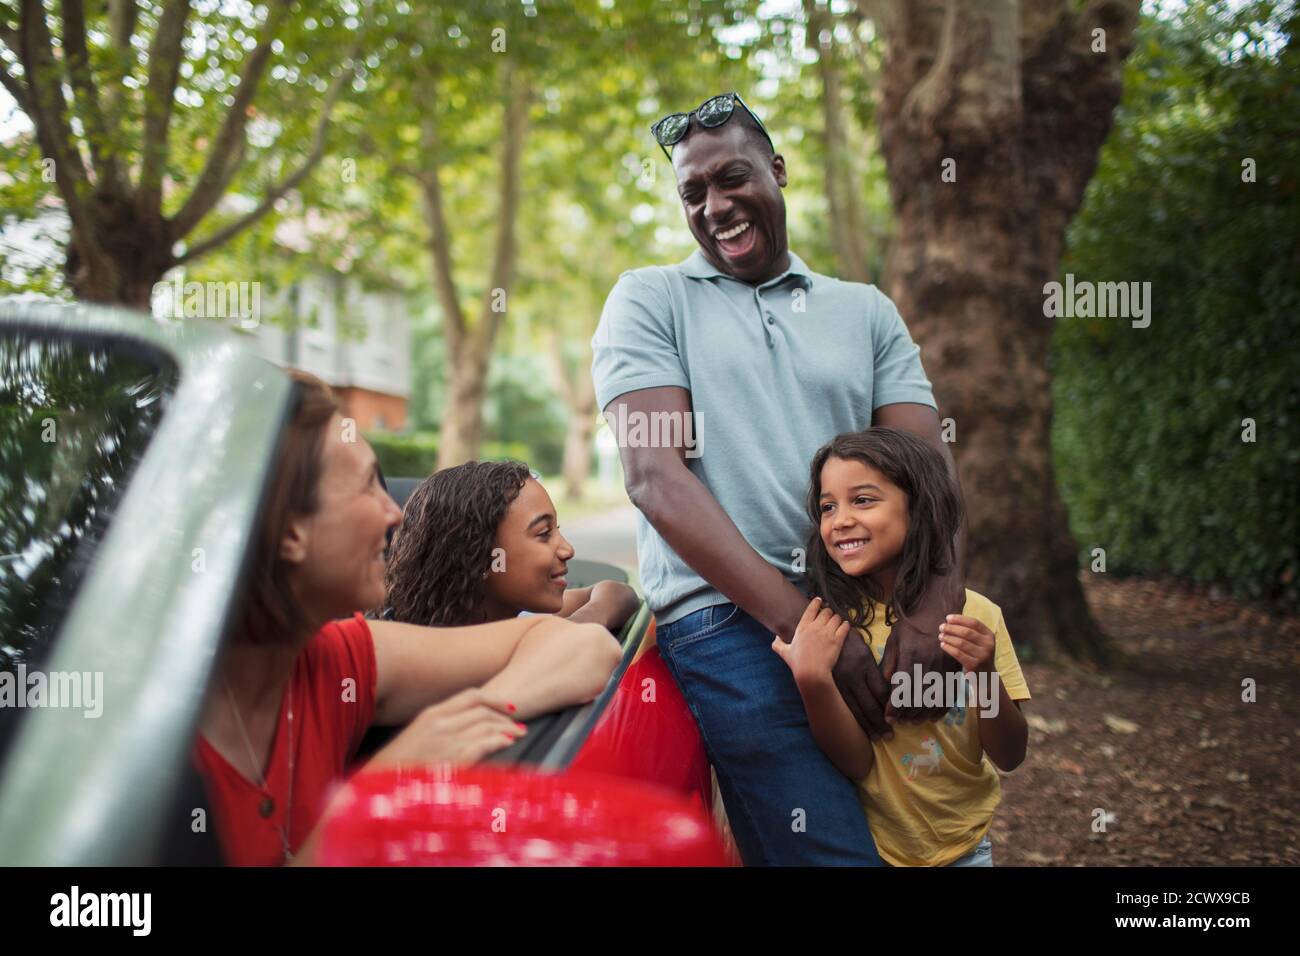 Happy family laughing at convertible in driveway Stock Photo